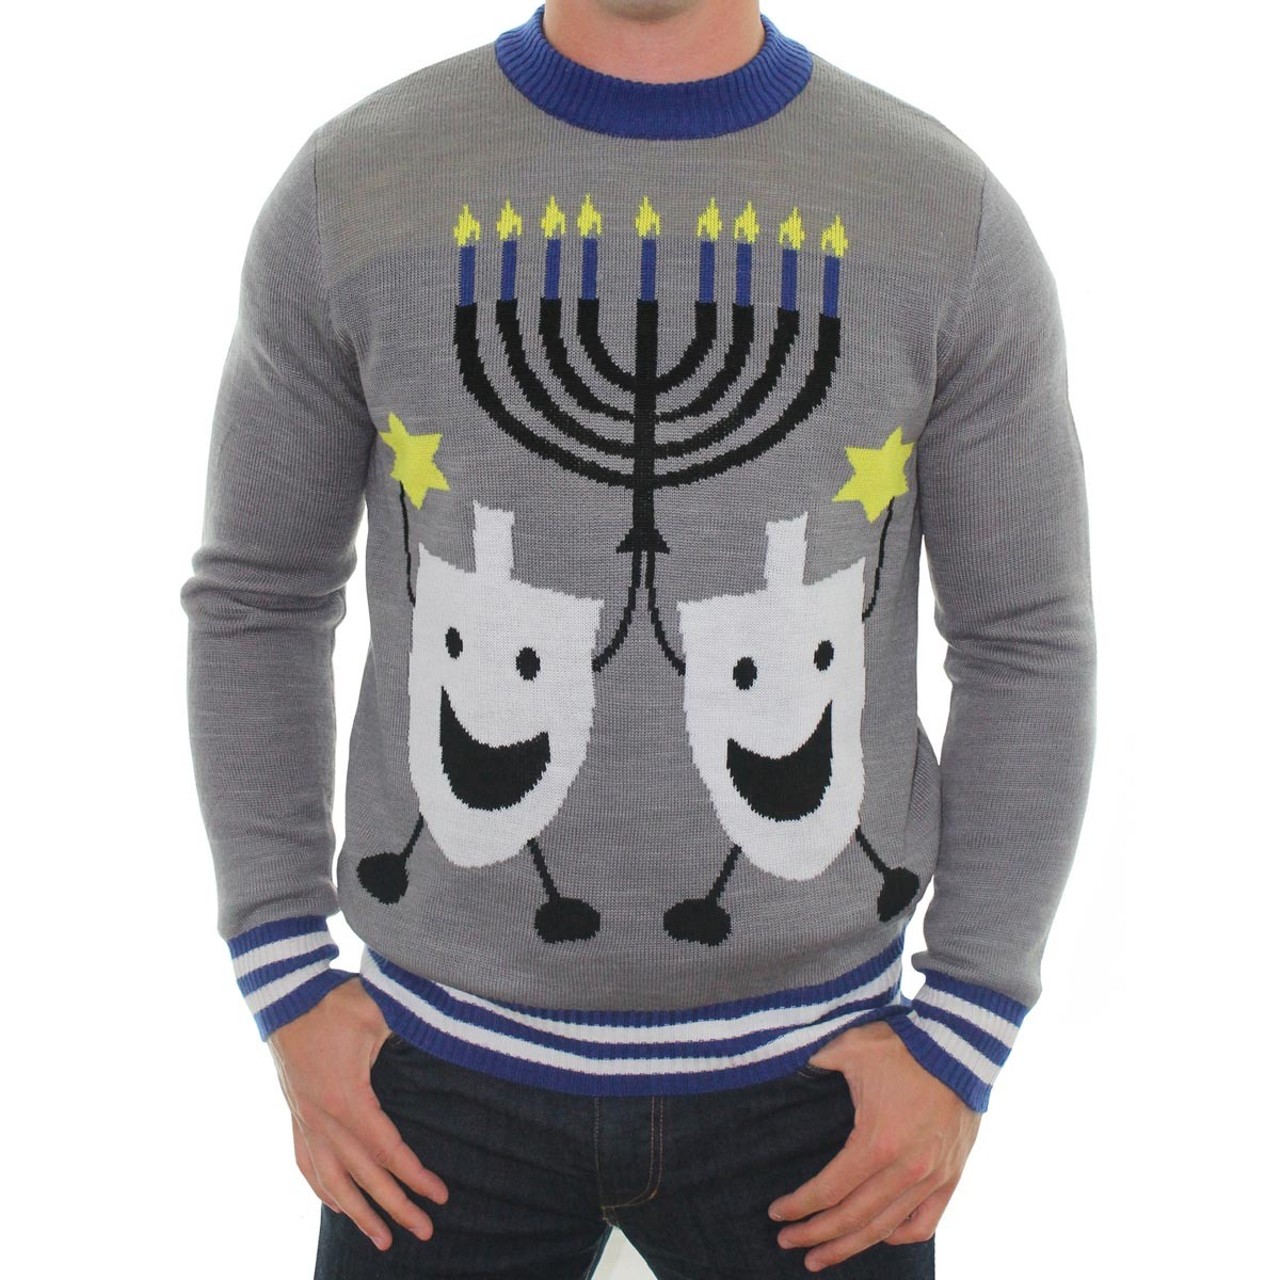 This Hanukkah sweater will keep the cheer going for all eight days. Look how happy the dreidels are!